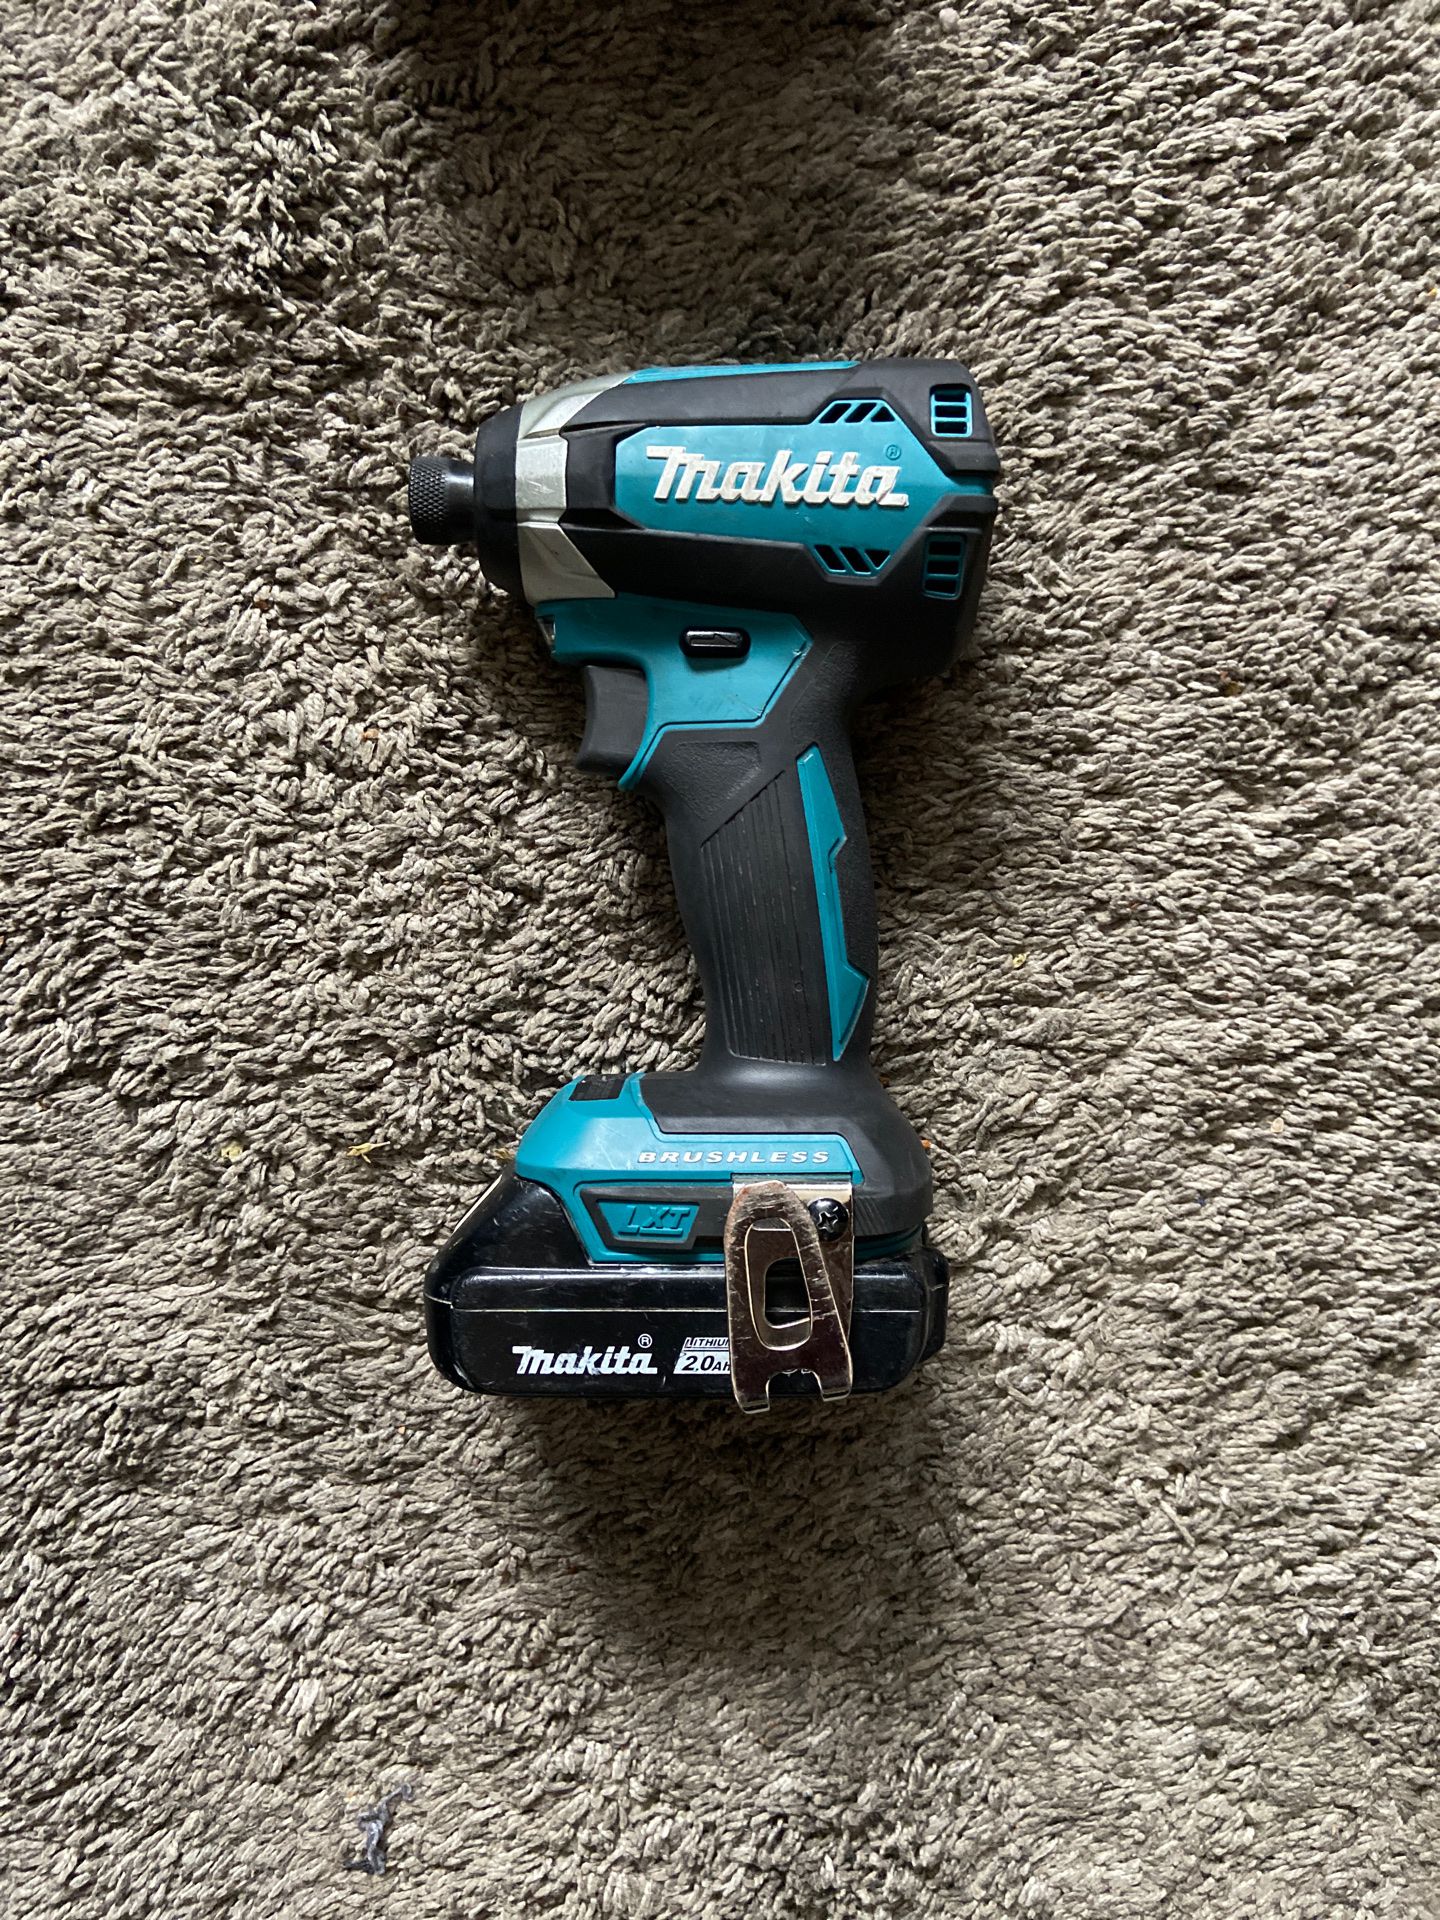 Makita 18v impact drill lithium ion battery rechargeable brushless motor